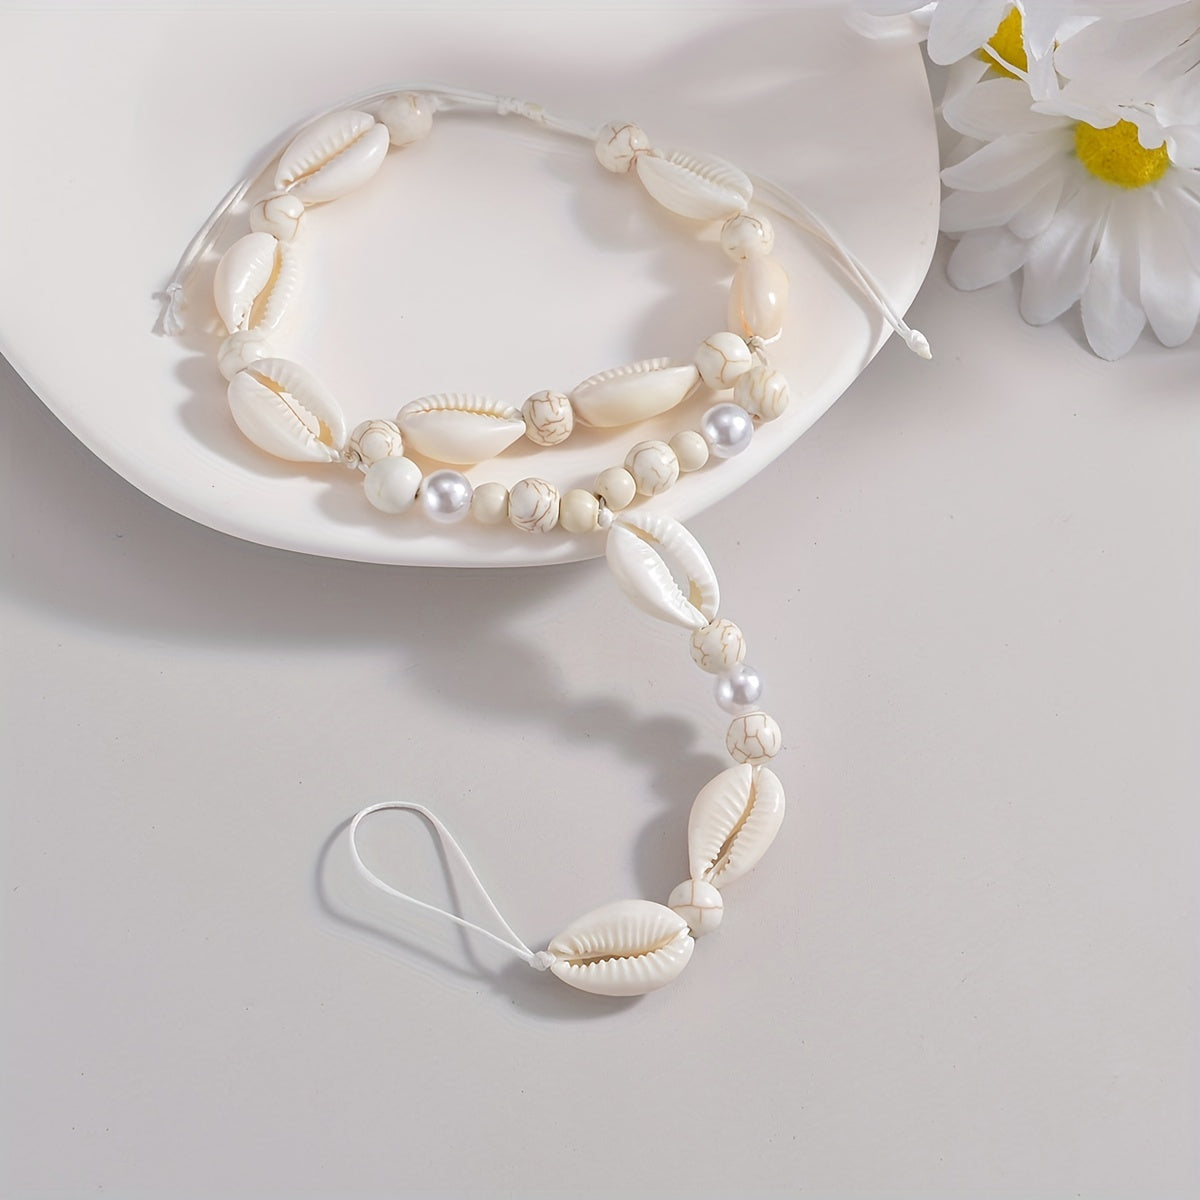 White Shell Shape Beads Beaded Toe Ring Anklet Ocean Style Ankle Bracelet Foot Jewelry Accessories